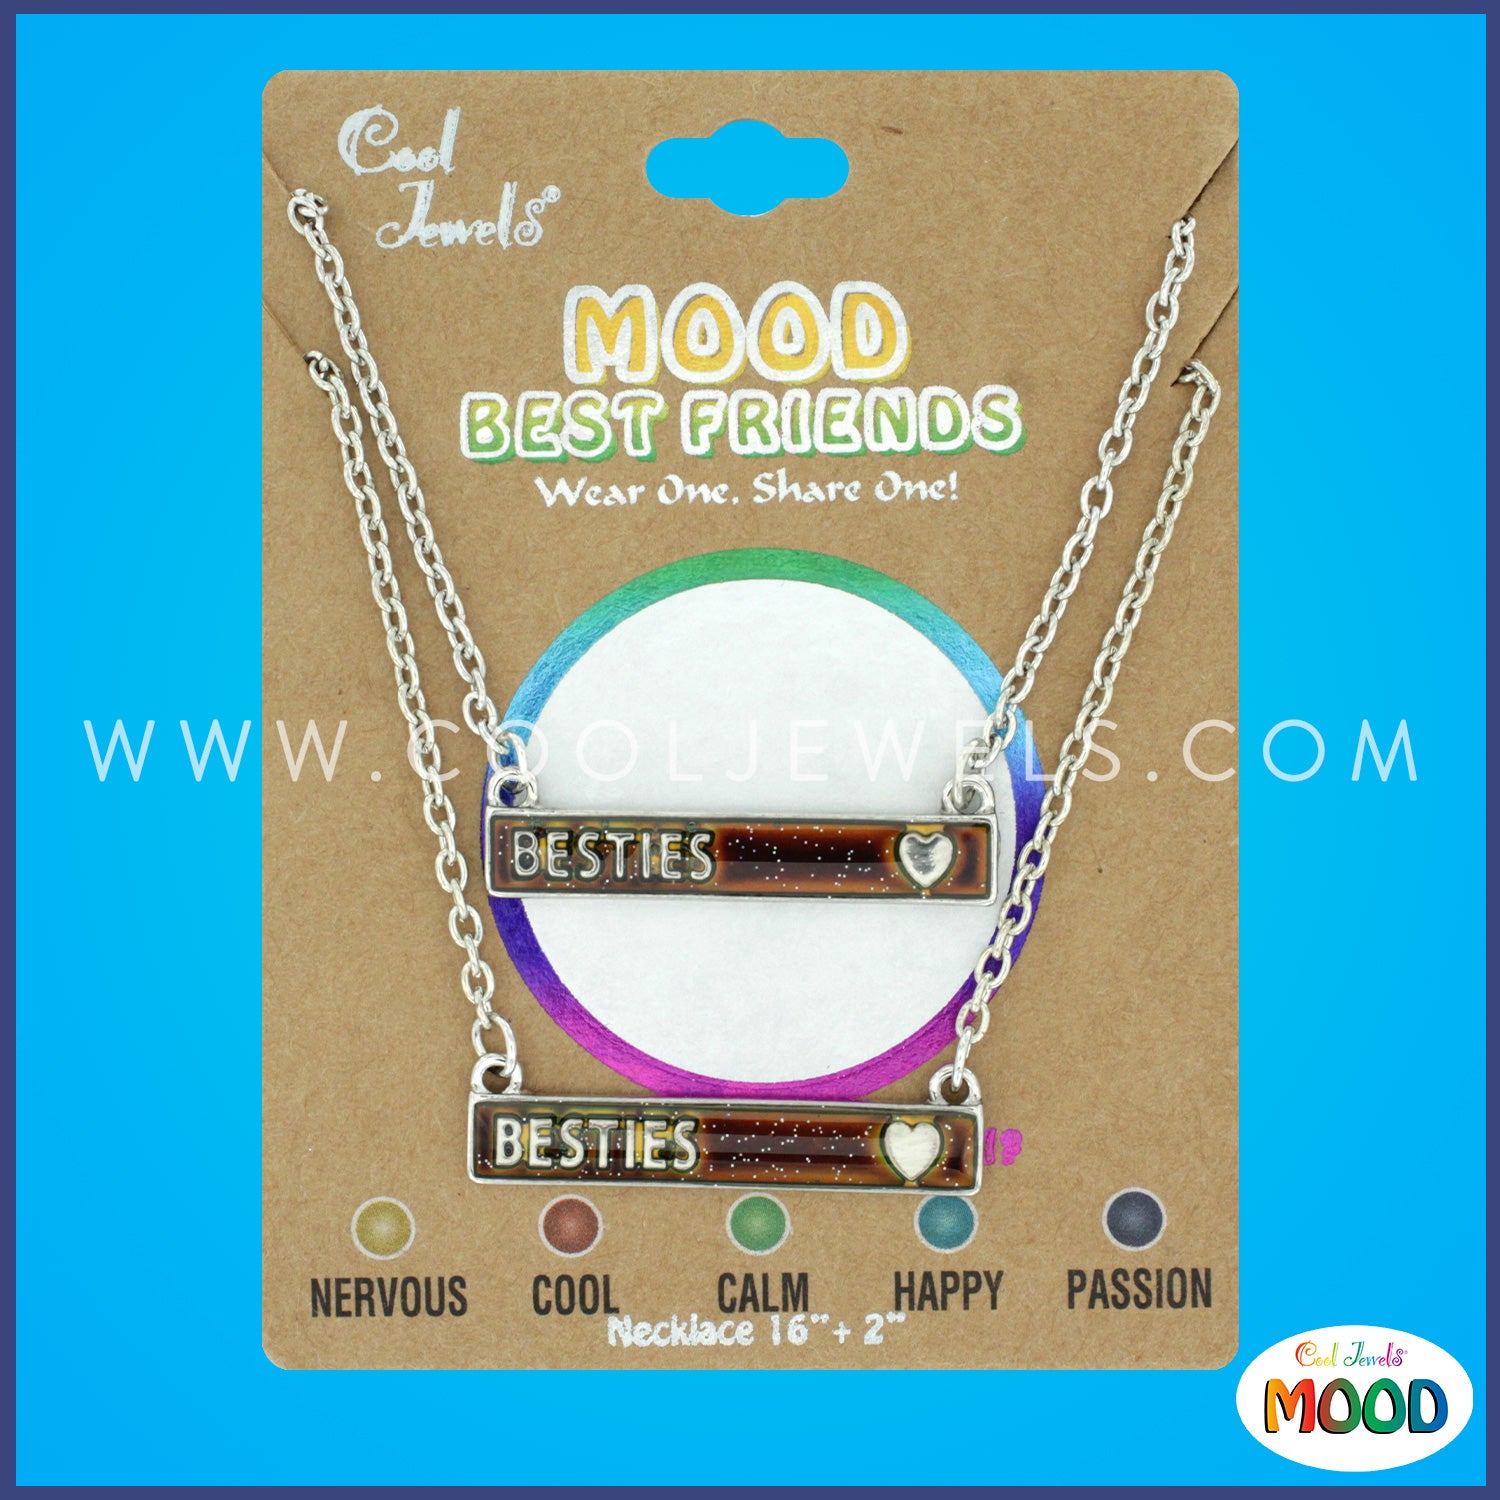 (SET OF 2) LINK CHAIN NECKLACE WITH MOOD BAR WITH"BESTIES" & HEART SYMBOL - CARDED